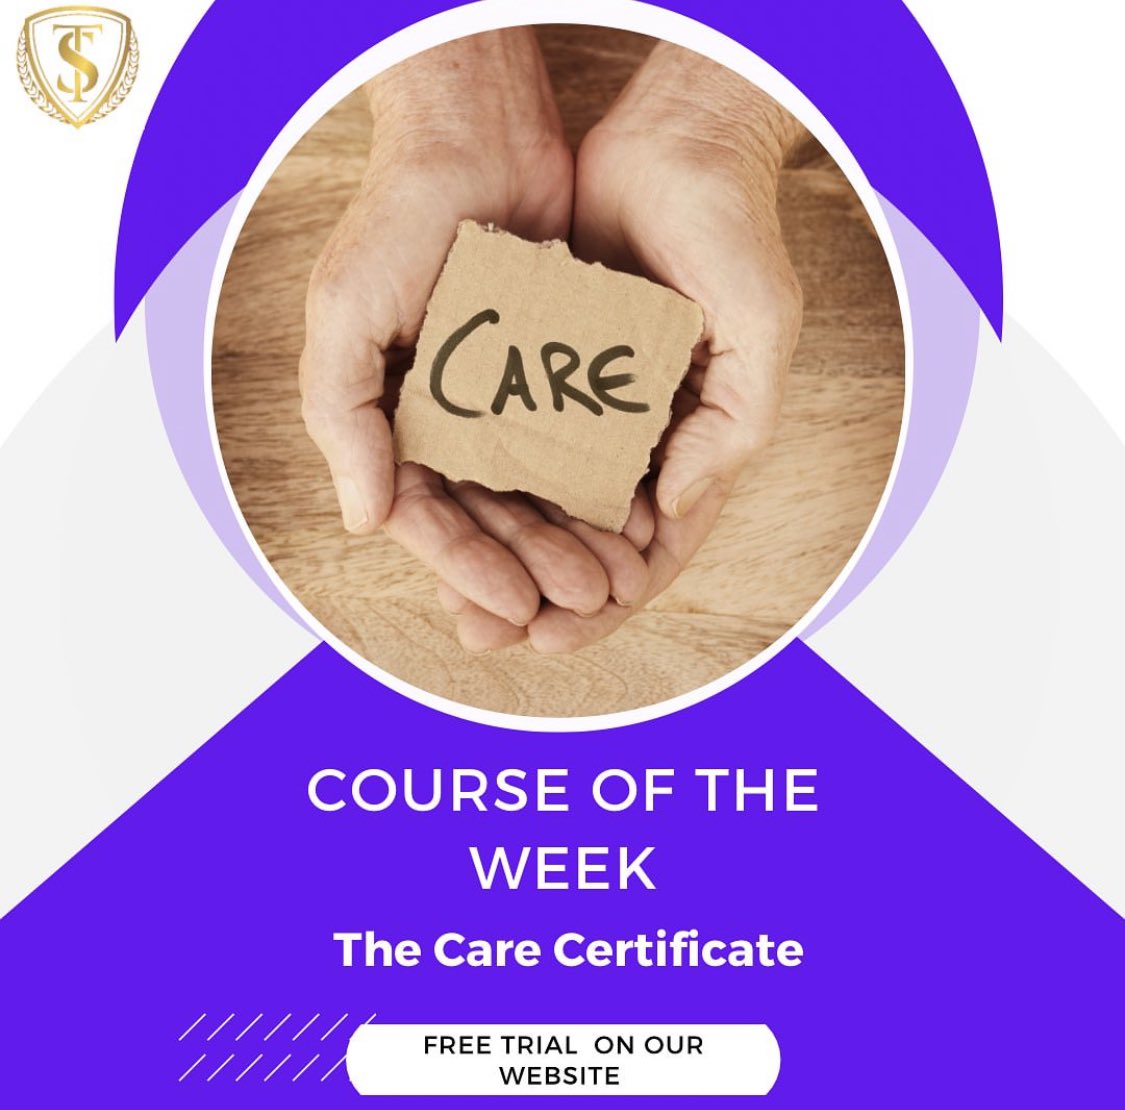 ⭐️The Care Certificate⭐️ is our course of the week
✅Covering the 15 standards of care
✅Perfect for new carers/inductions

Visit our website to find out more…
Link in our bio

#care #caringmatters #carepro #homecare #domicillarycare #caregiving #carehomes #careers